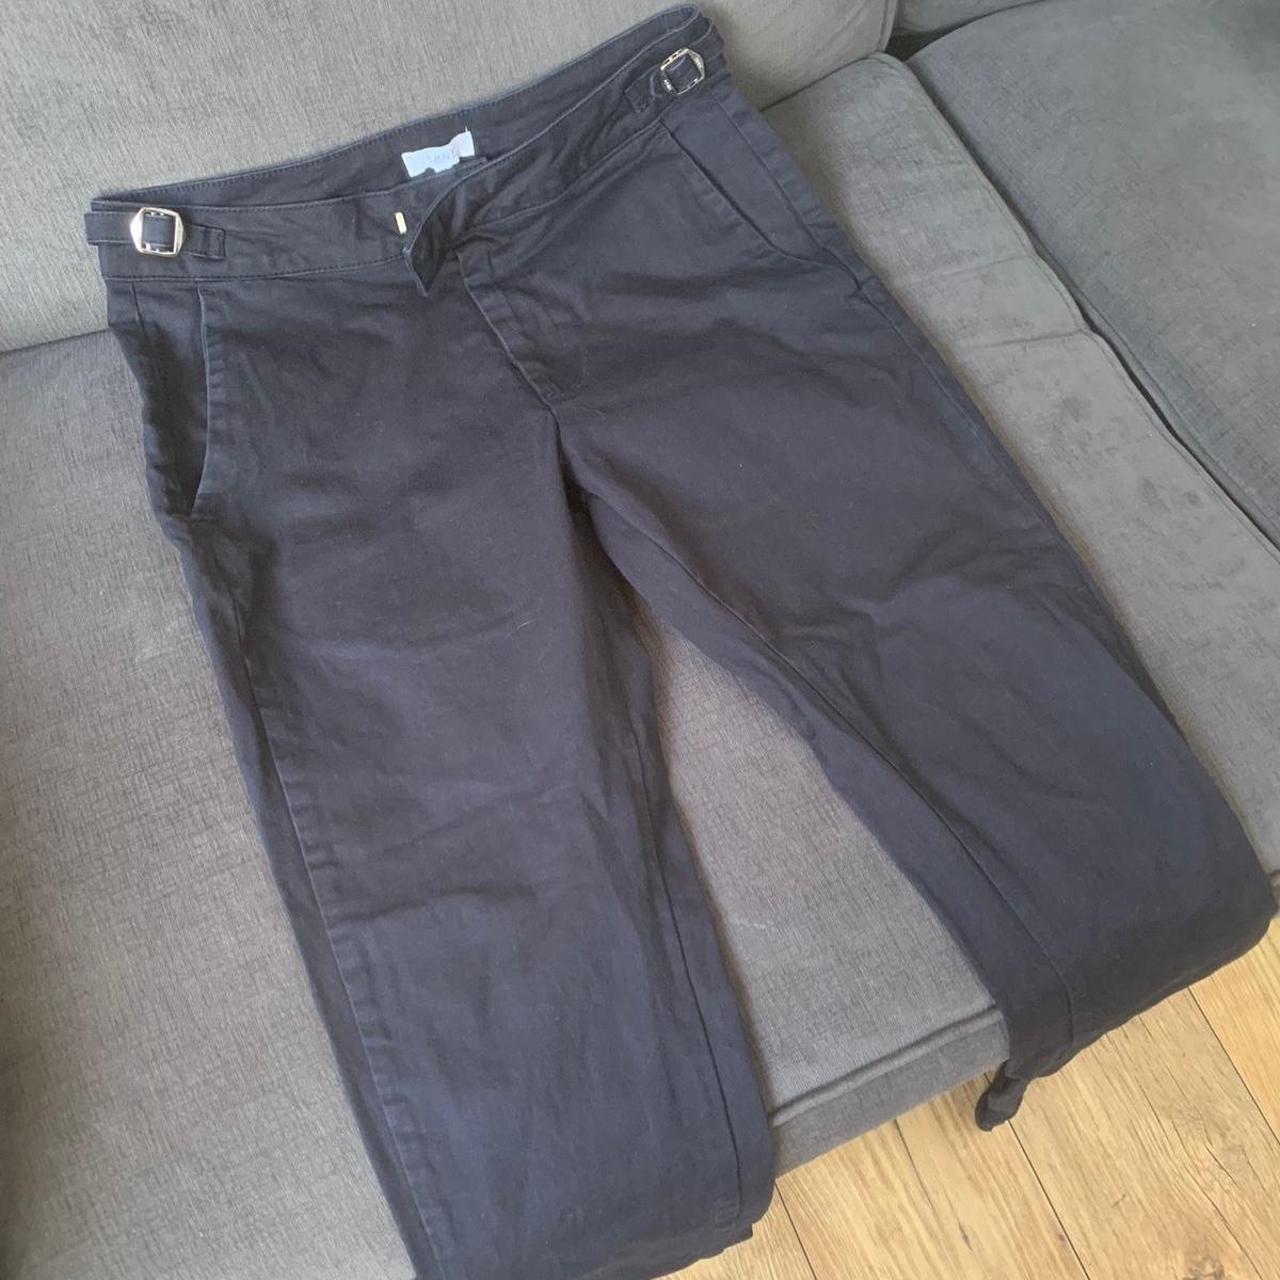 Arne chino trousers with side adjusters size 30 long... - Depop